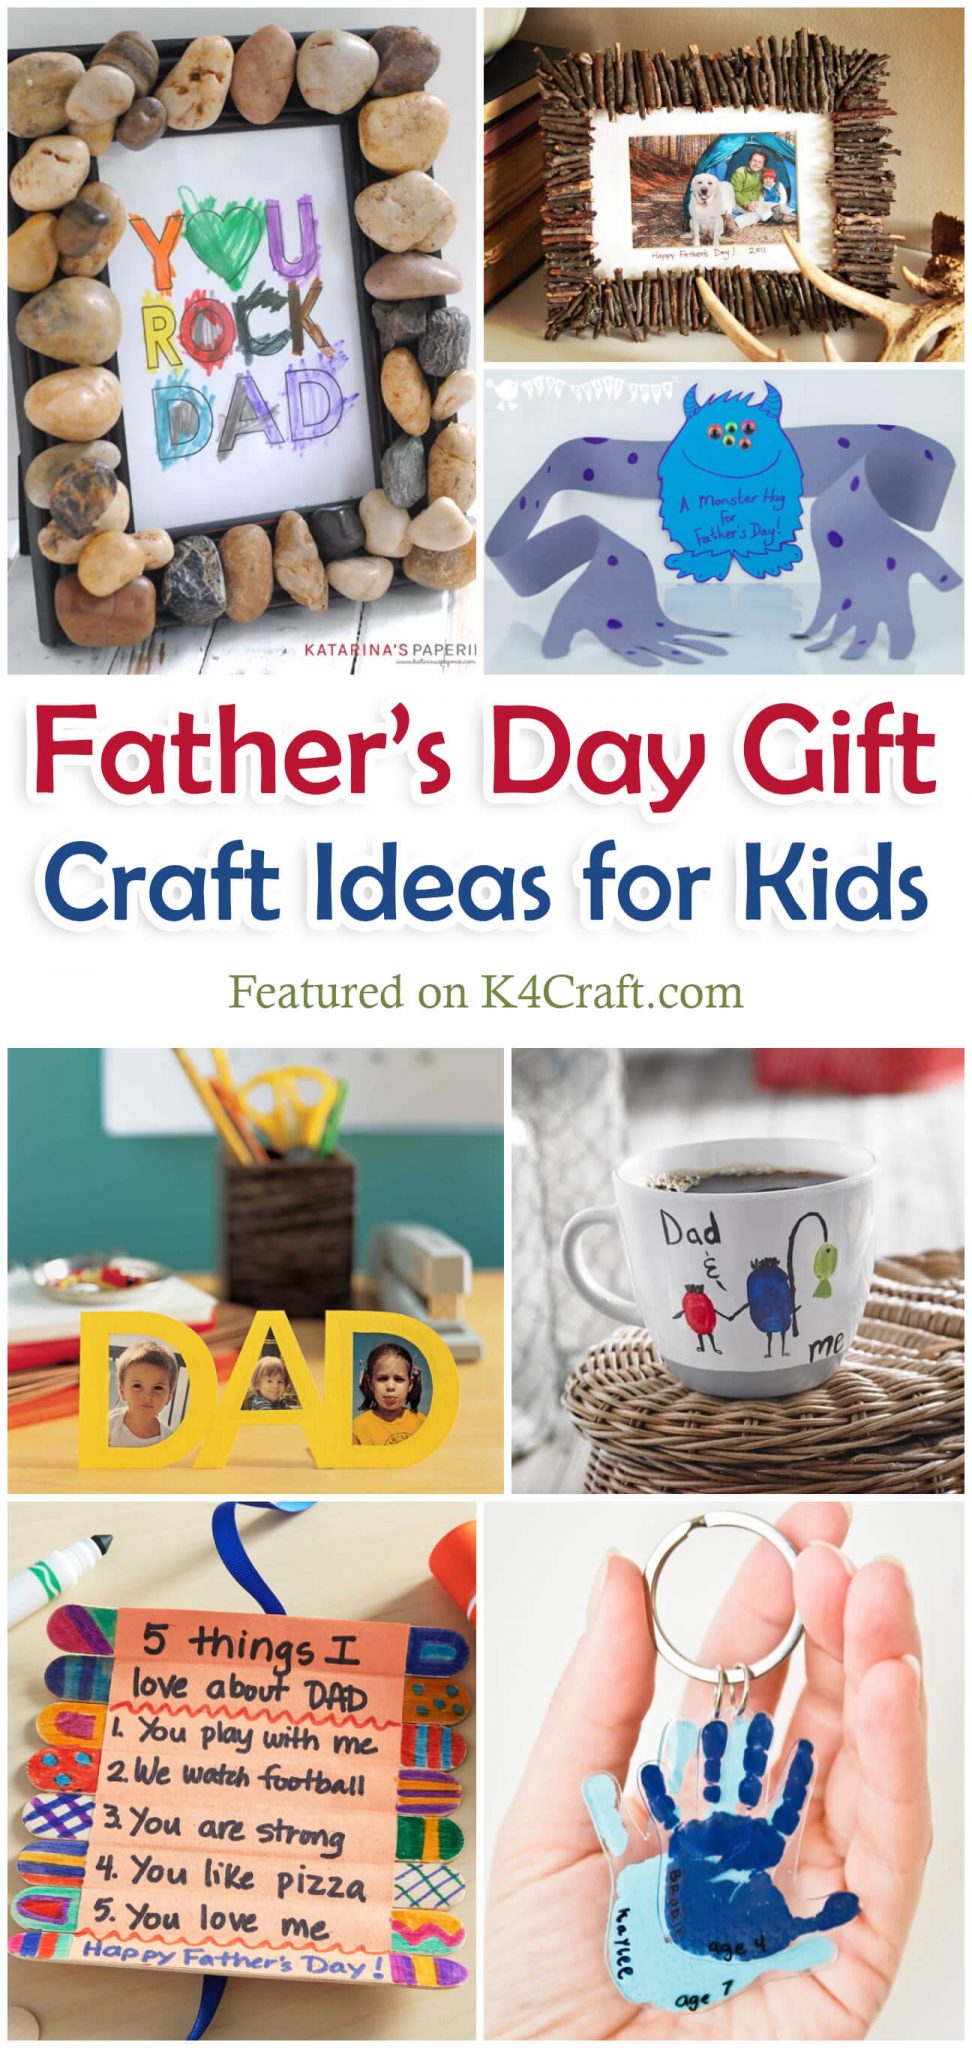 Delightful Father's Day Crafts for Kids and Toddlers